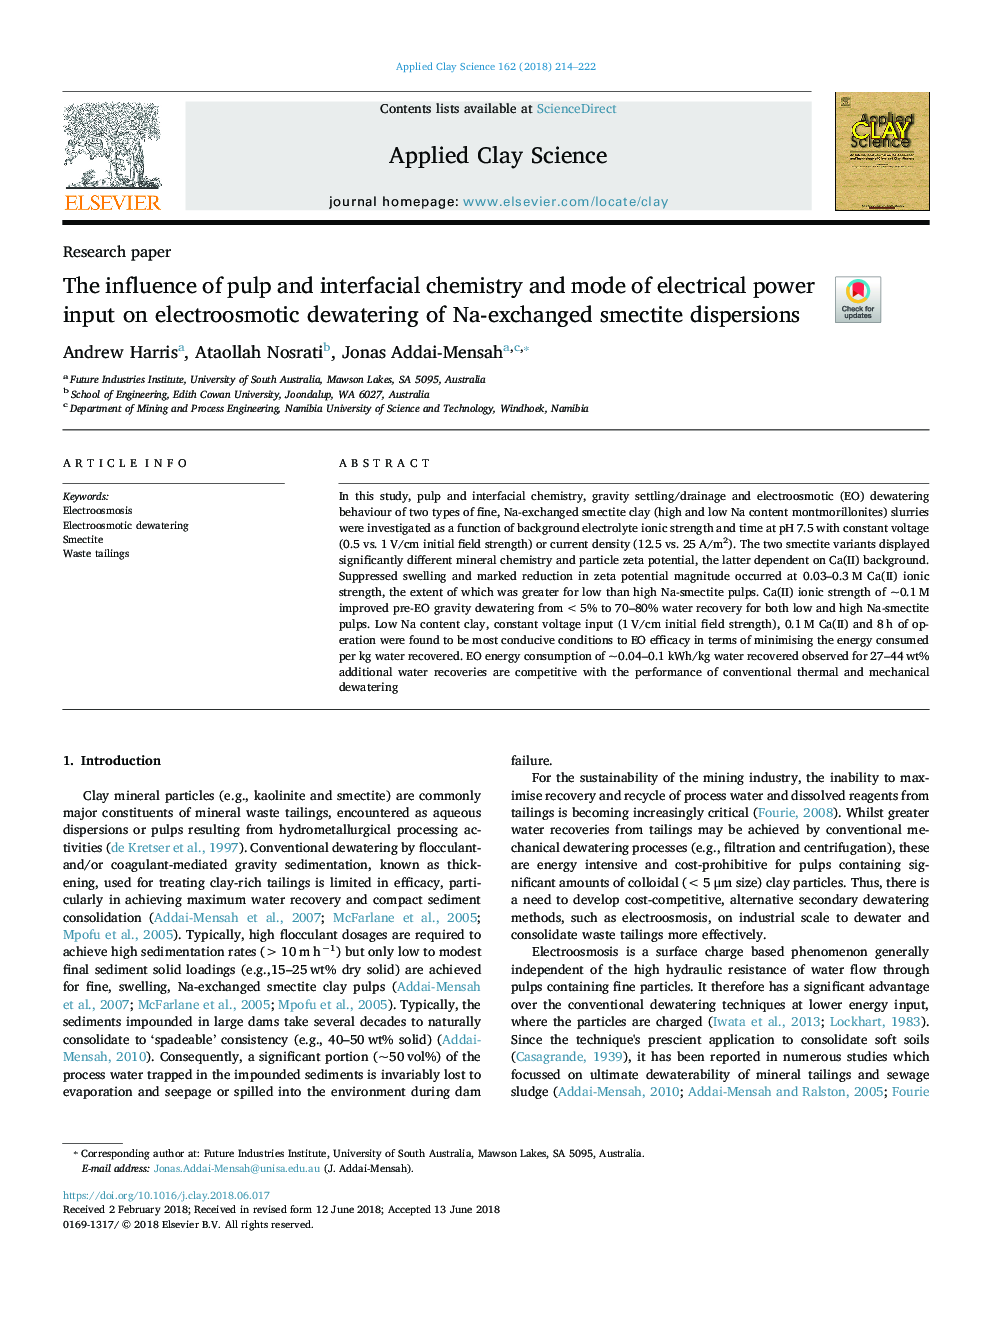 The influence of pulp and interfacial chemistry and mode of electrical power input on electroosmotic dewatering of Na-exchanged smectite dispersions